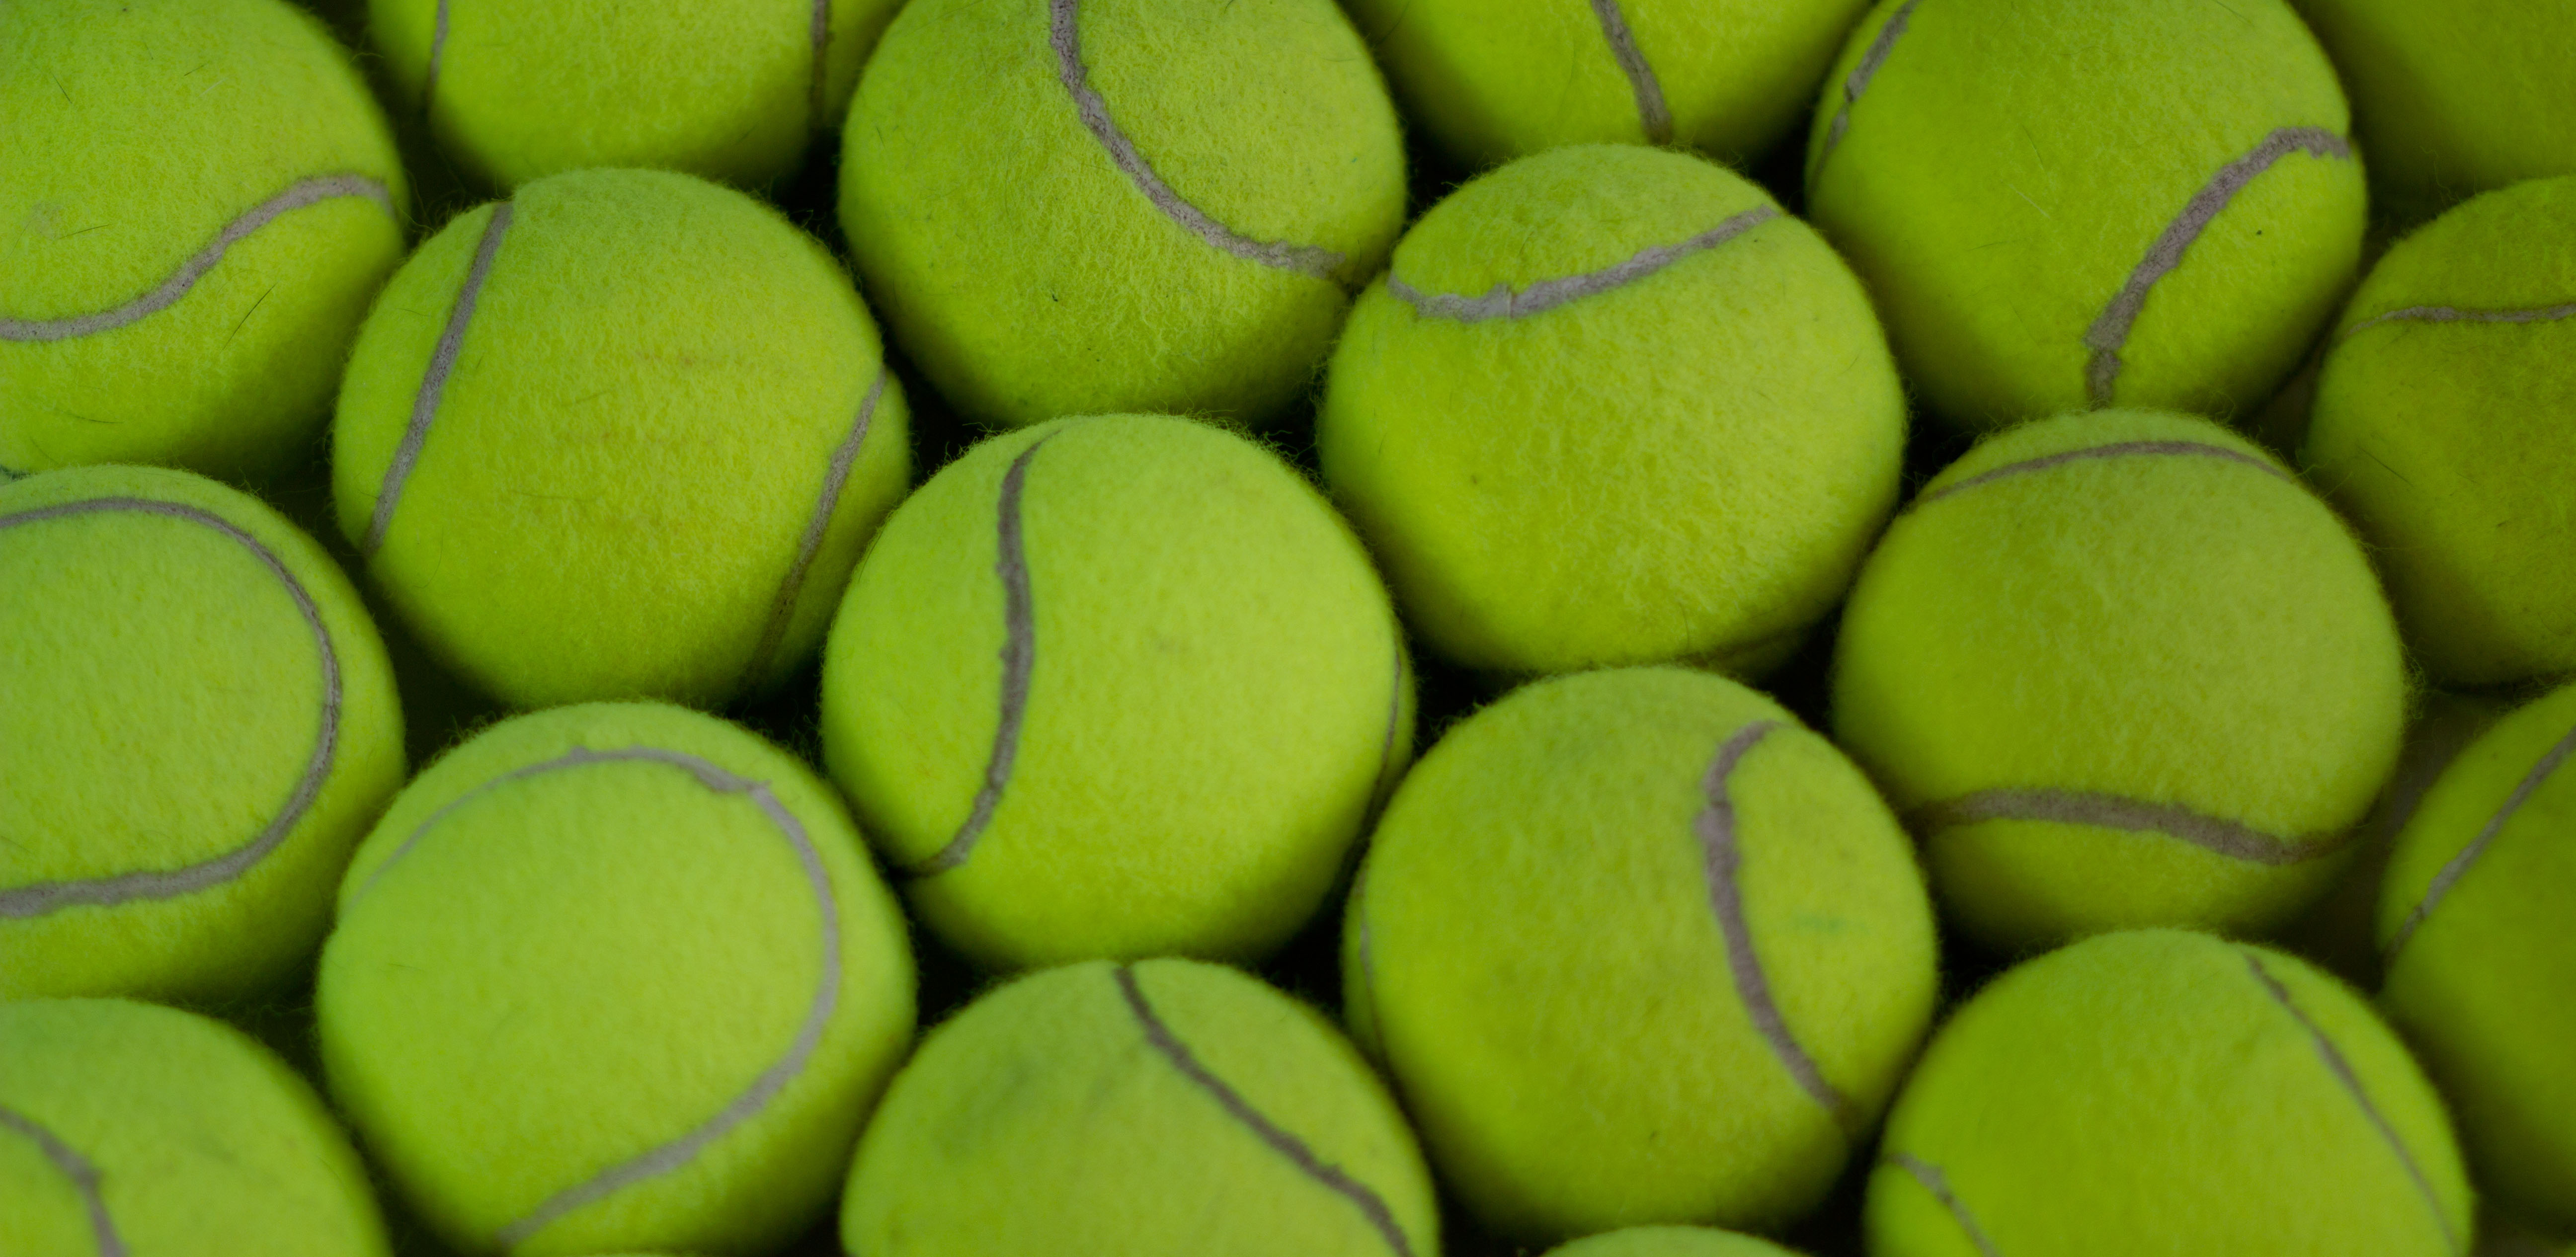 How many ways can you arrange 128 tennis balls? Researchers solve an ...